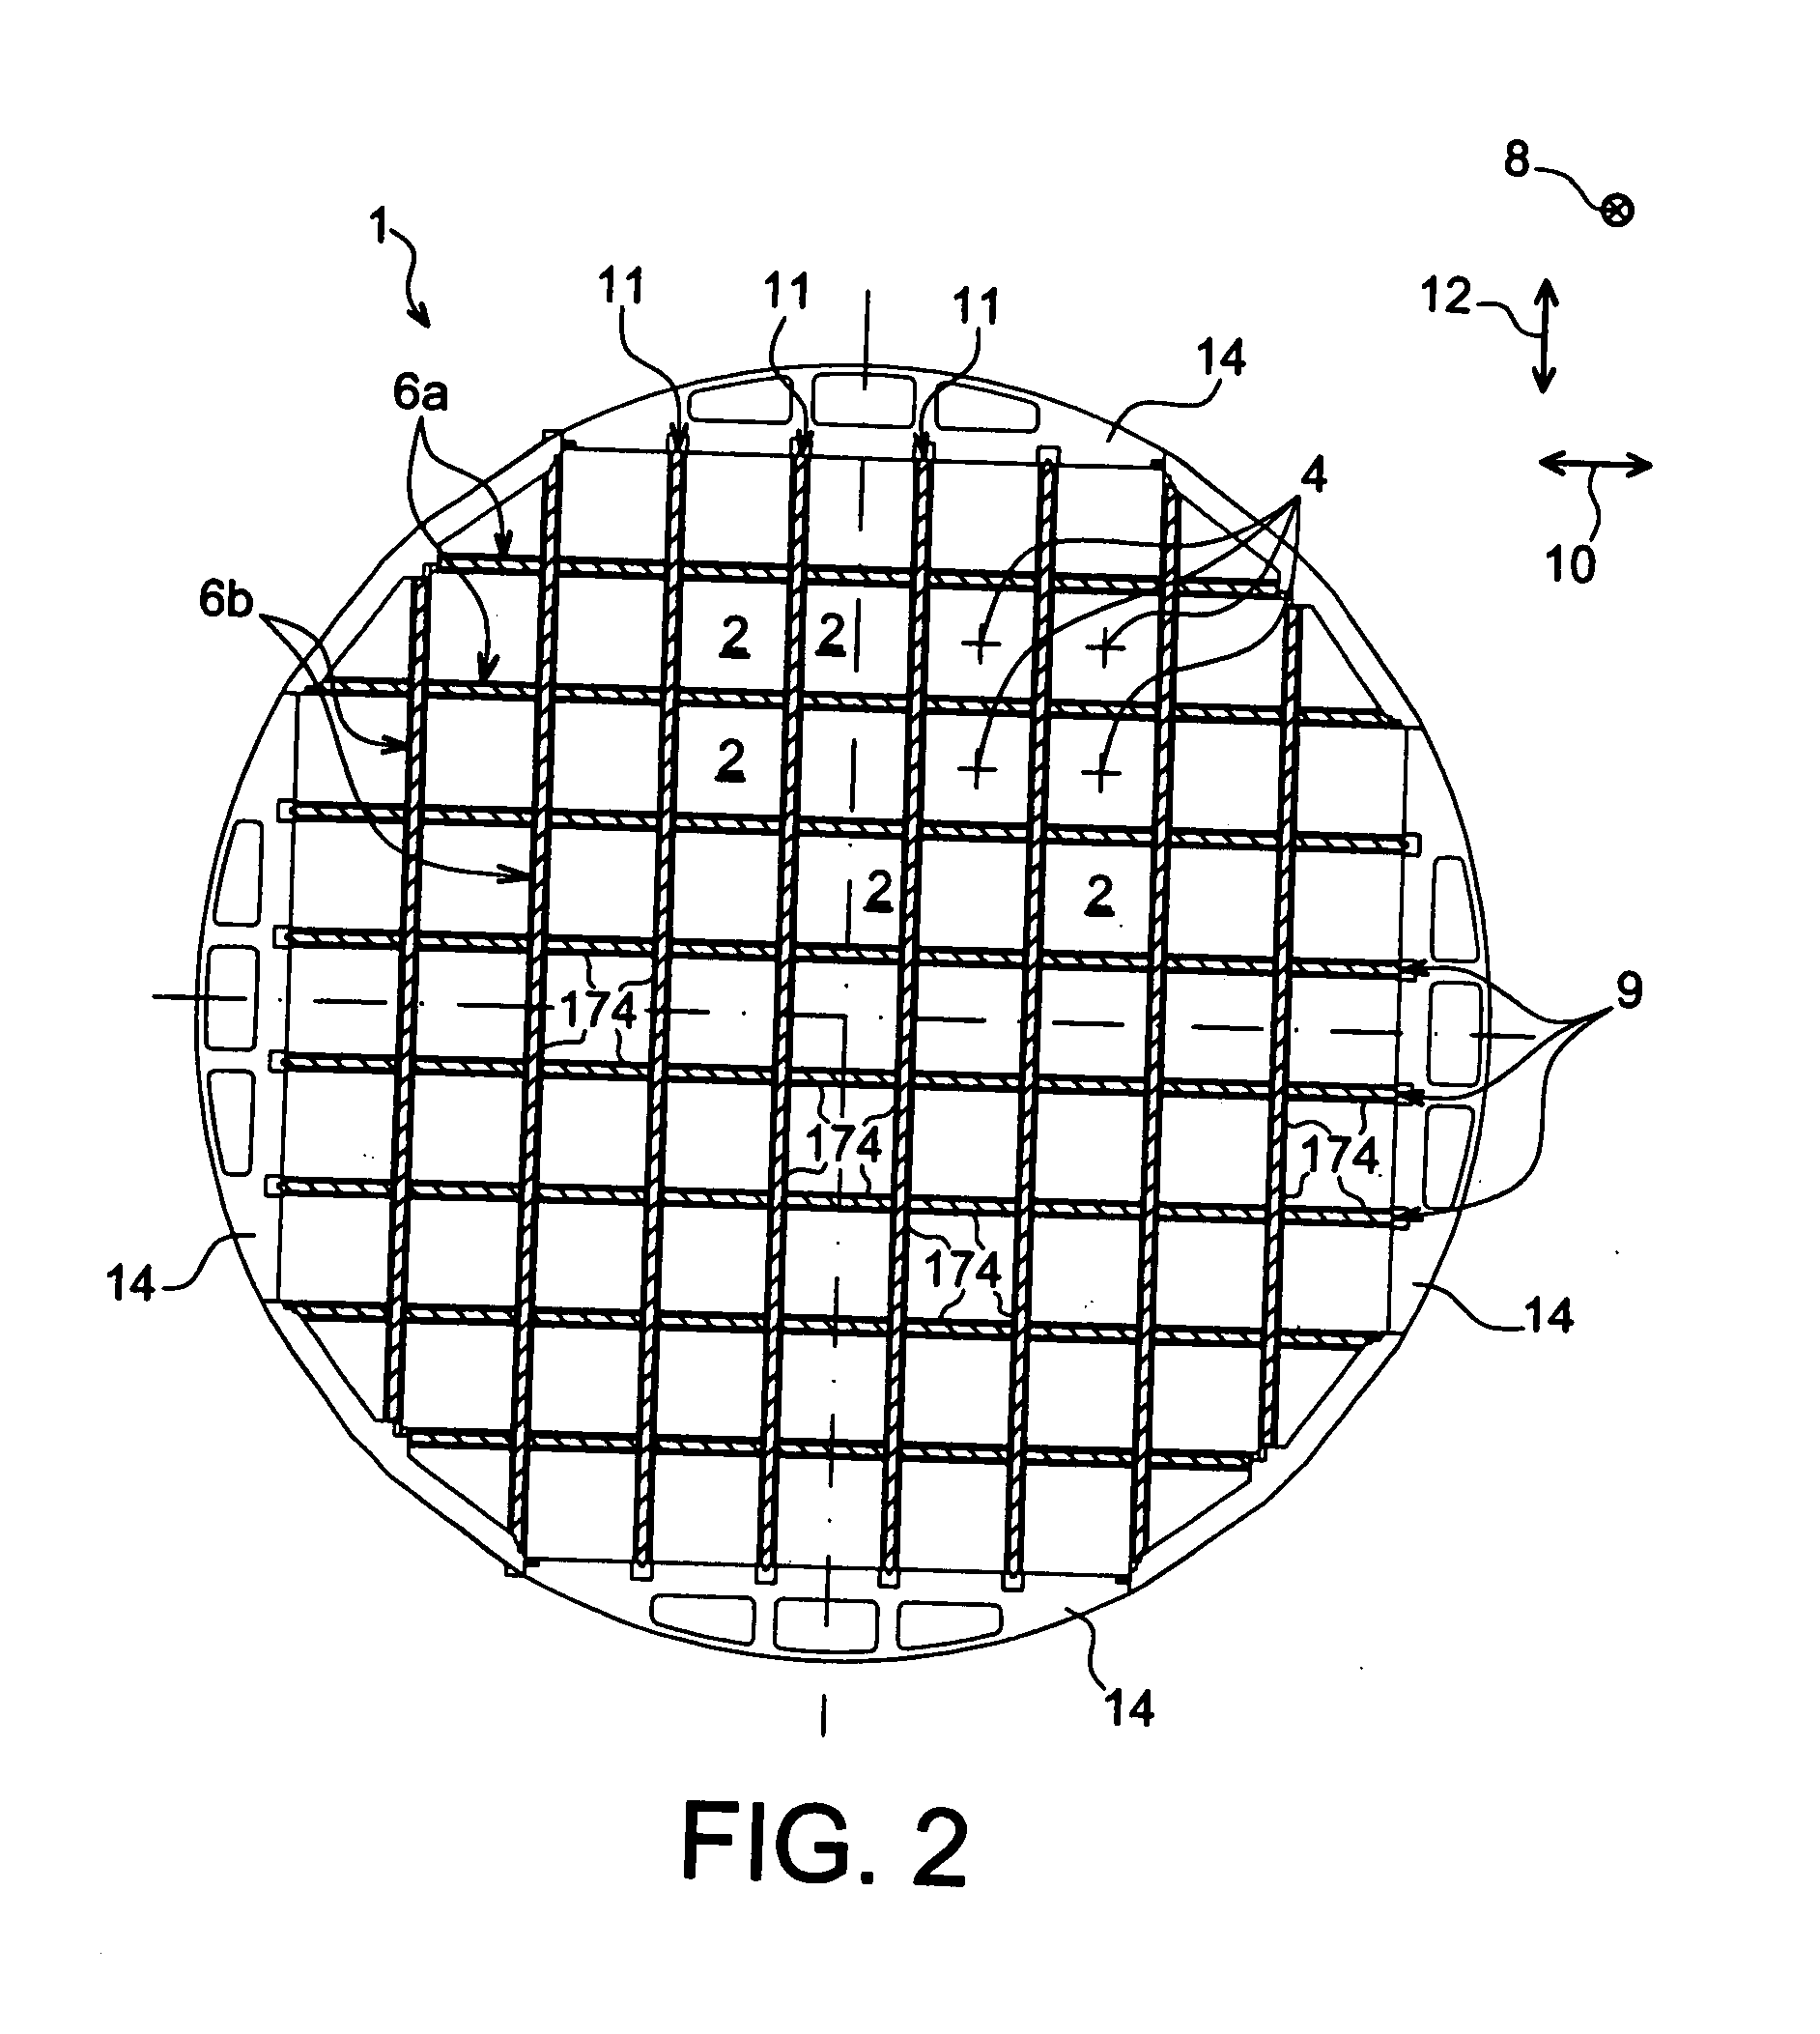 Storage device for storing and/or transporting nuclear fuel assemblies